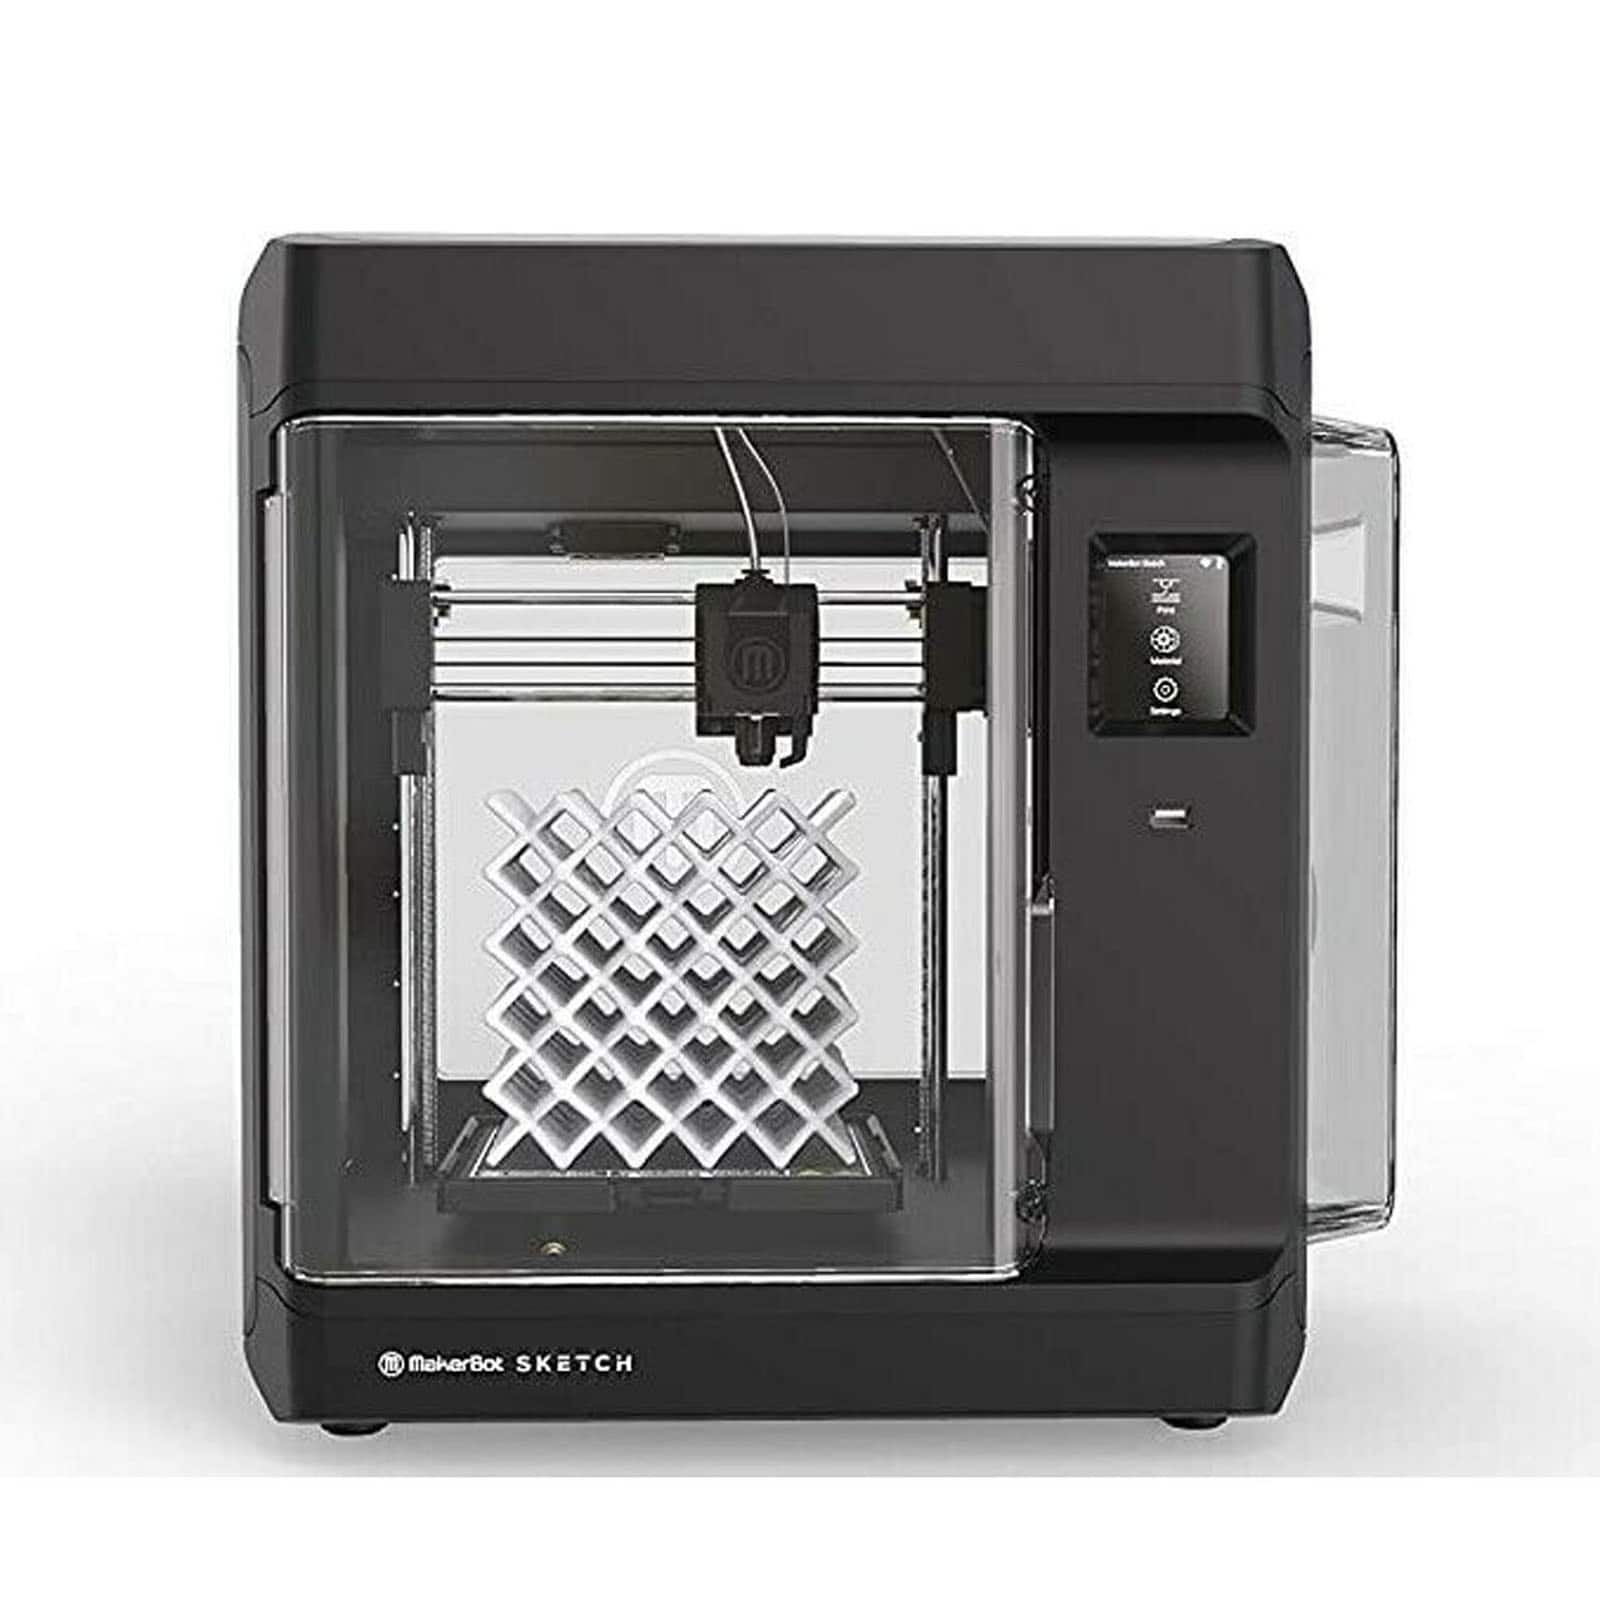 Michaels Stores Likely to Begin Selling Cube 3D Printers - 3DPrint